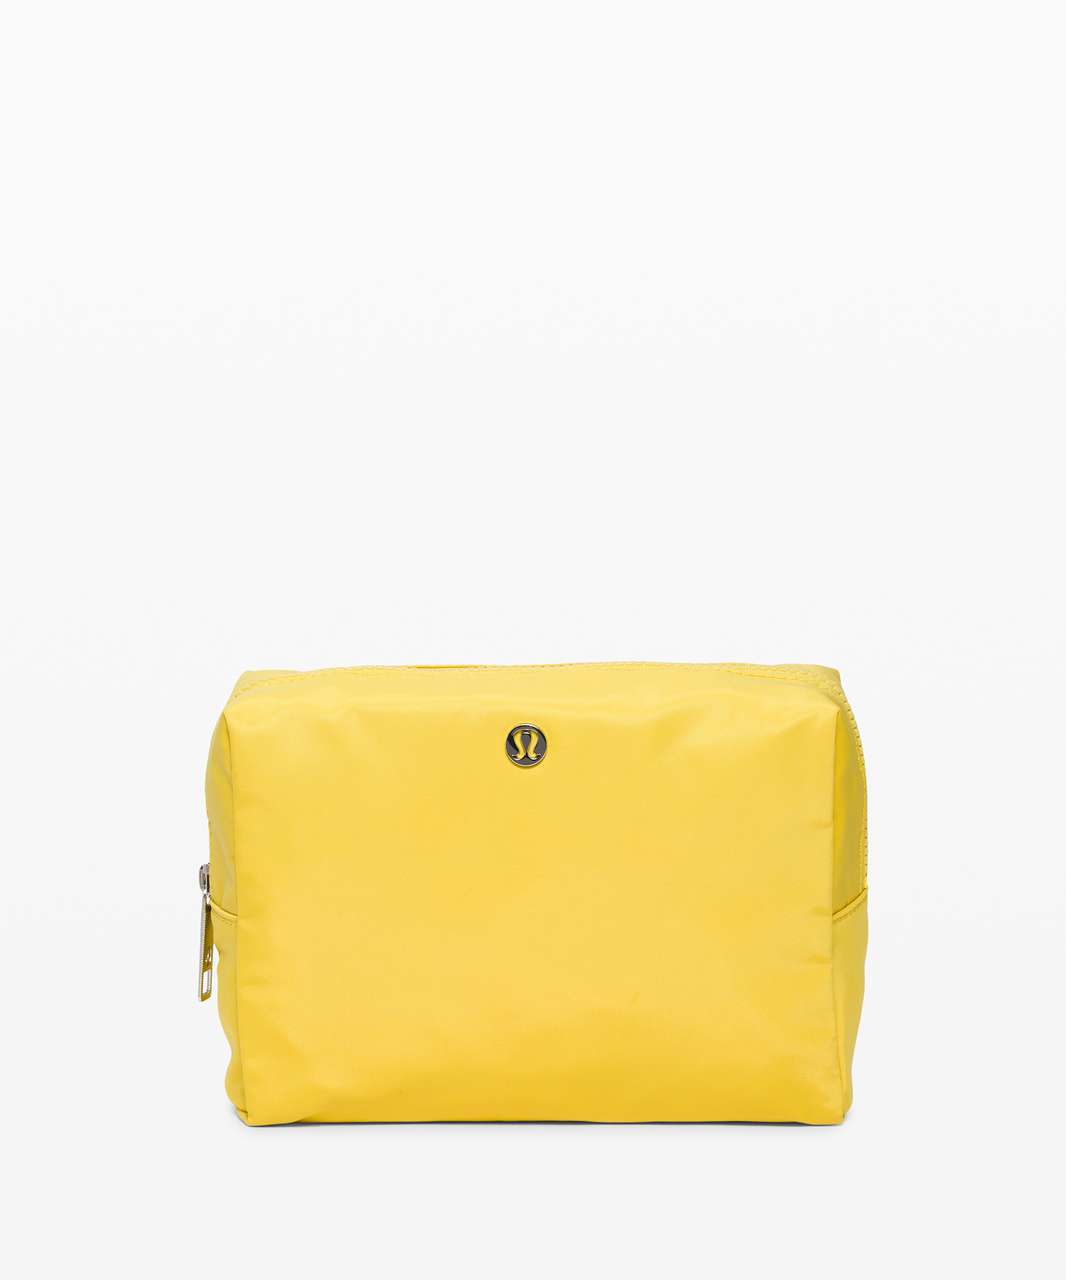 Lululemon All Your Small Things Pouch *4L - Soleil